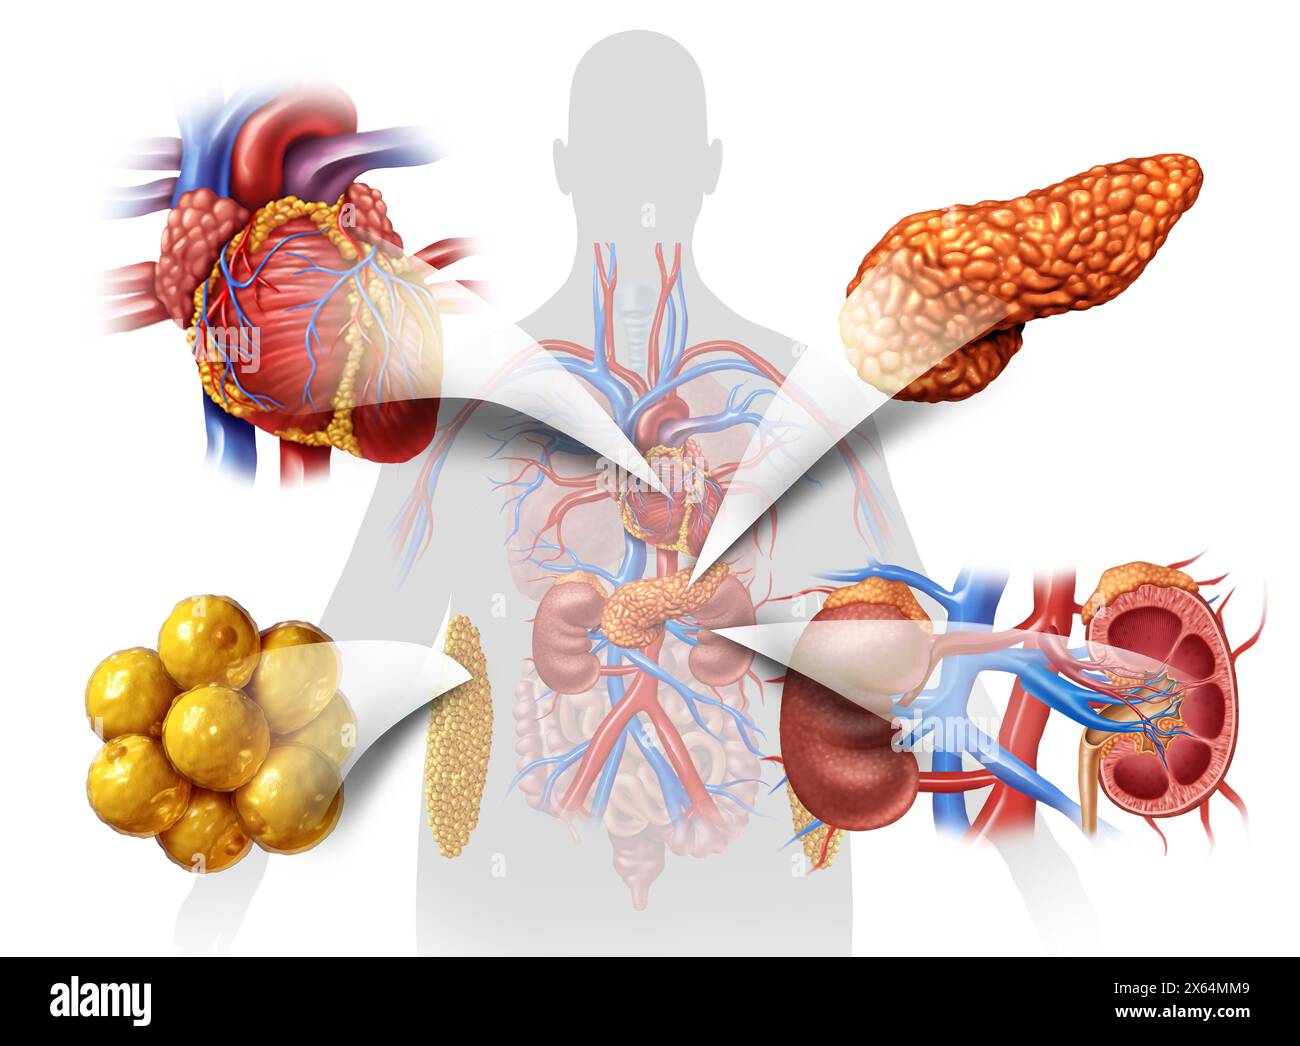 Cardiovascular kidney metabolic syndrome as a multisystem disorder as disease related to a group of organs as kidneys heart pancreas and Adipose cells Stock Photo